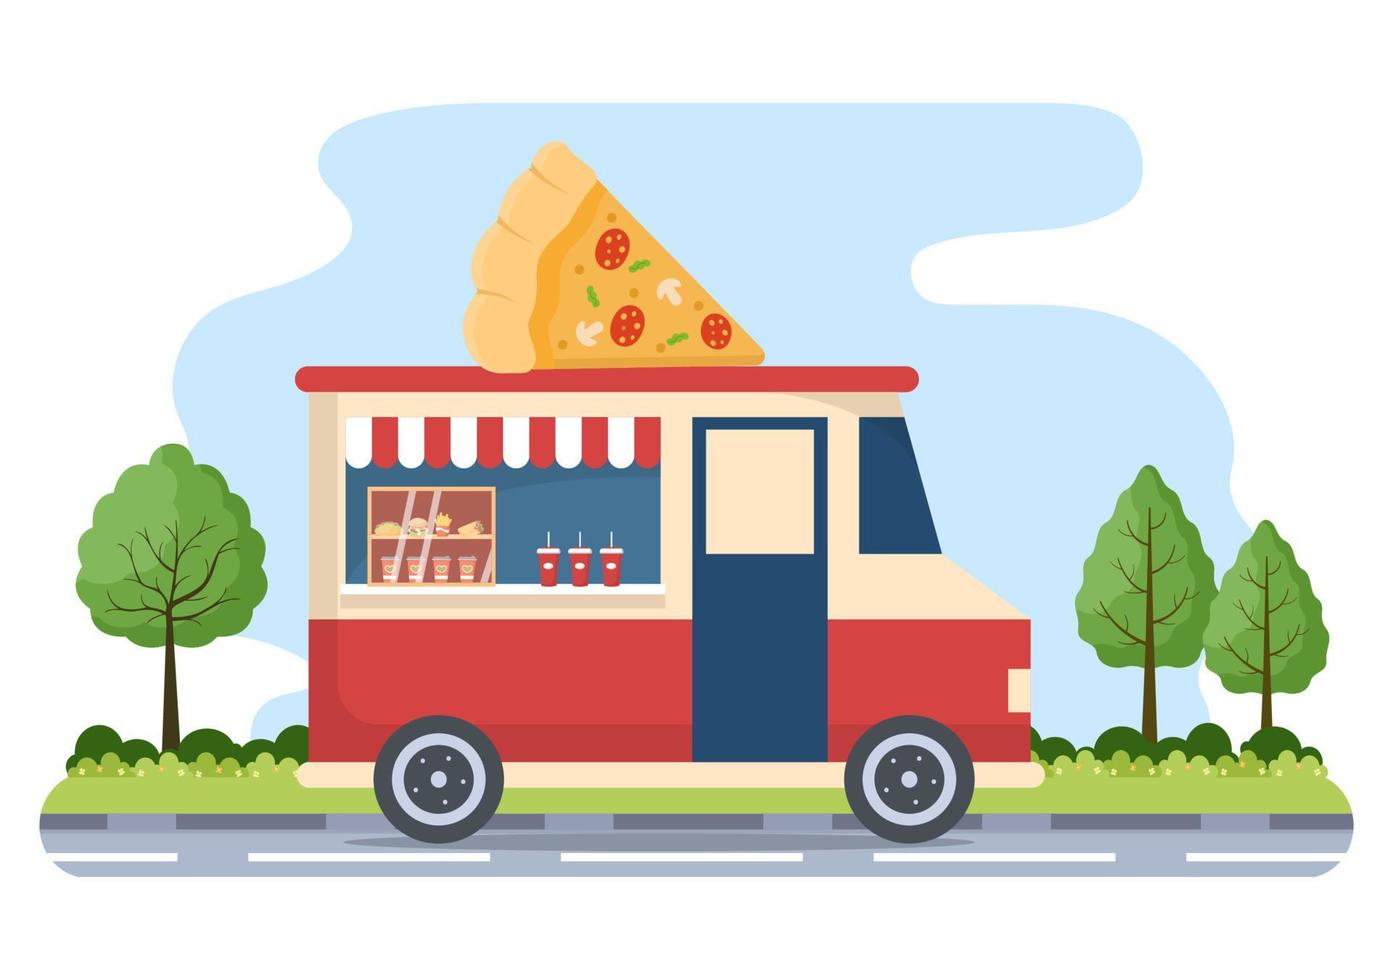 Outdoor Street and Food Truck Serving Fast Food such as Pizza, Burger, Hot Dog or Tacos in Flat Cartoon Background Poster Illustration vector